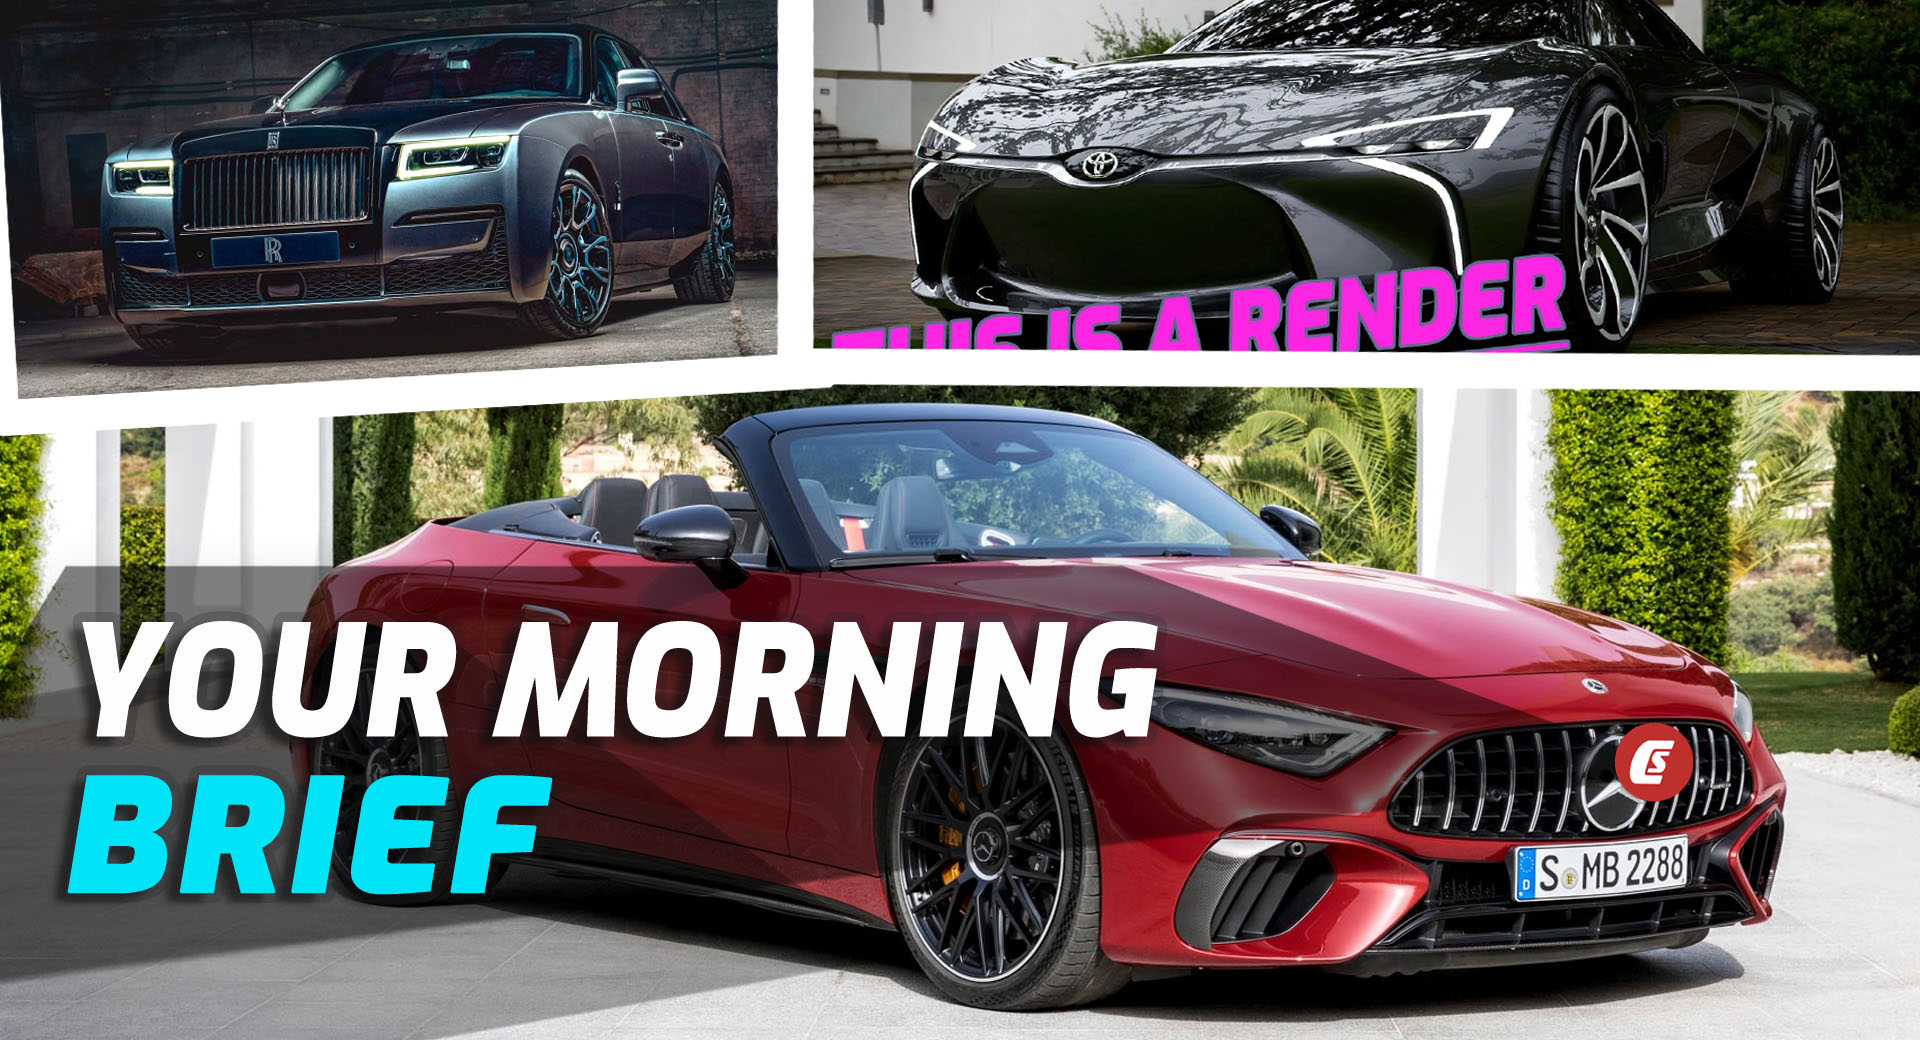 New Mercedes-AMG SL Breaks With Tradition, Rolls Royce Black Badge Wears Blackest  Paint, And That Fake MR-2 Story: Your Morning Brief